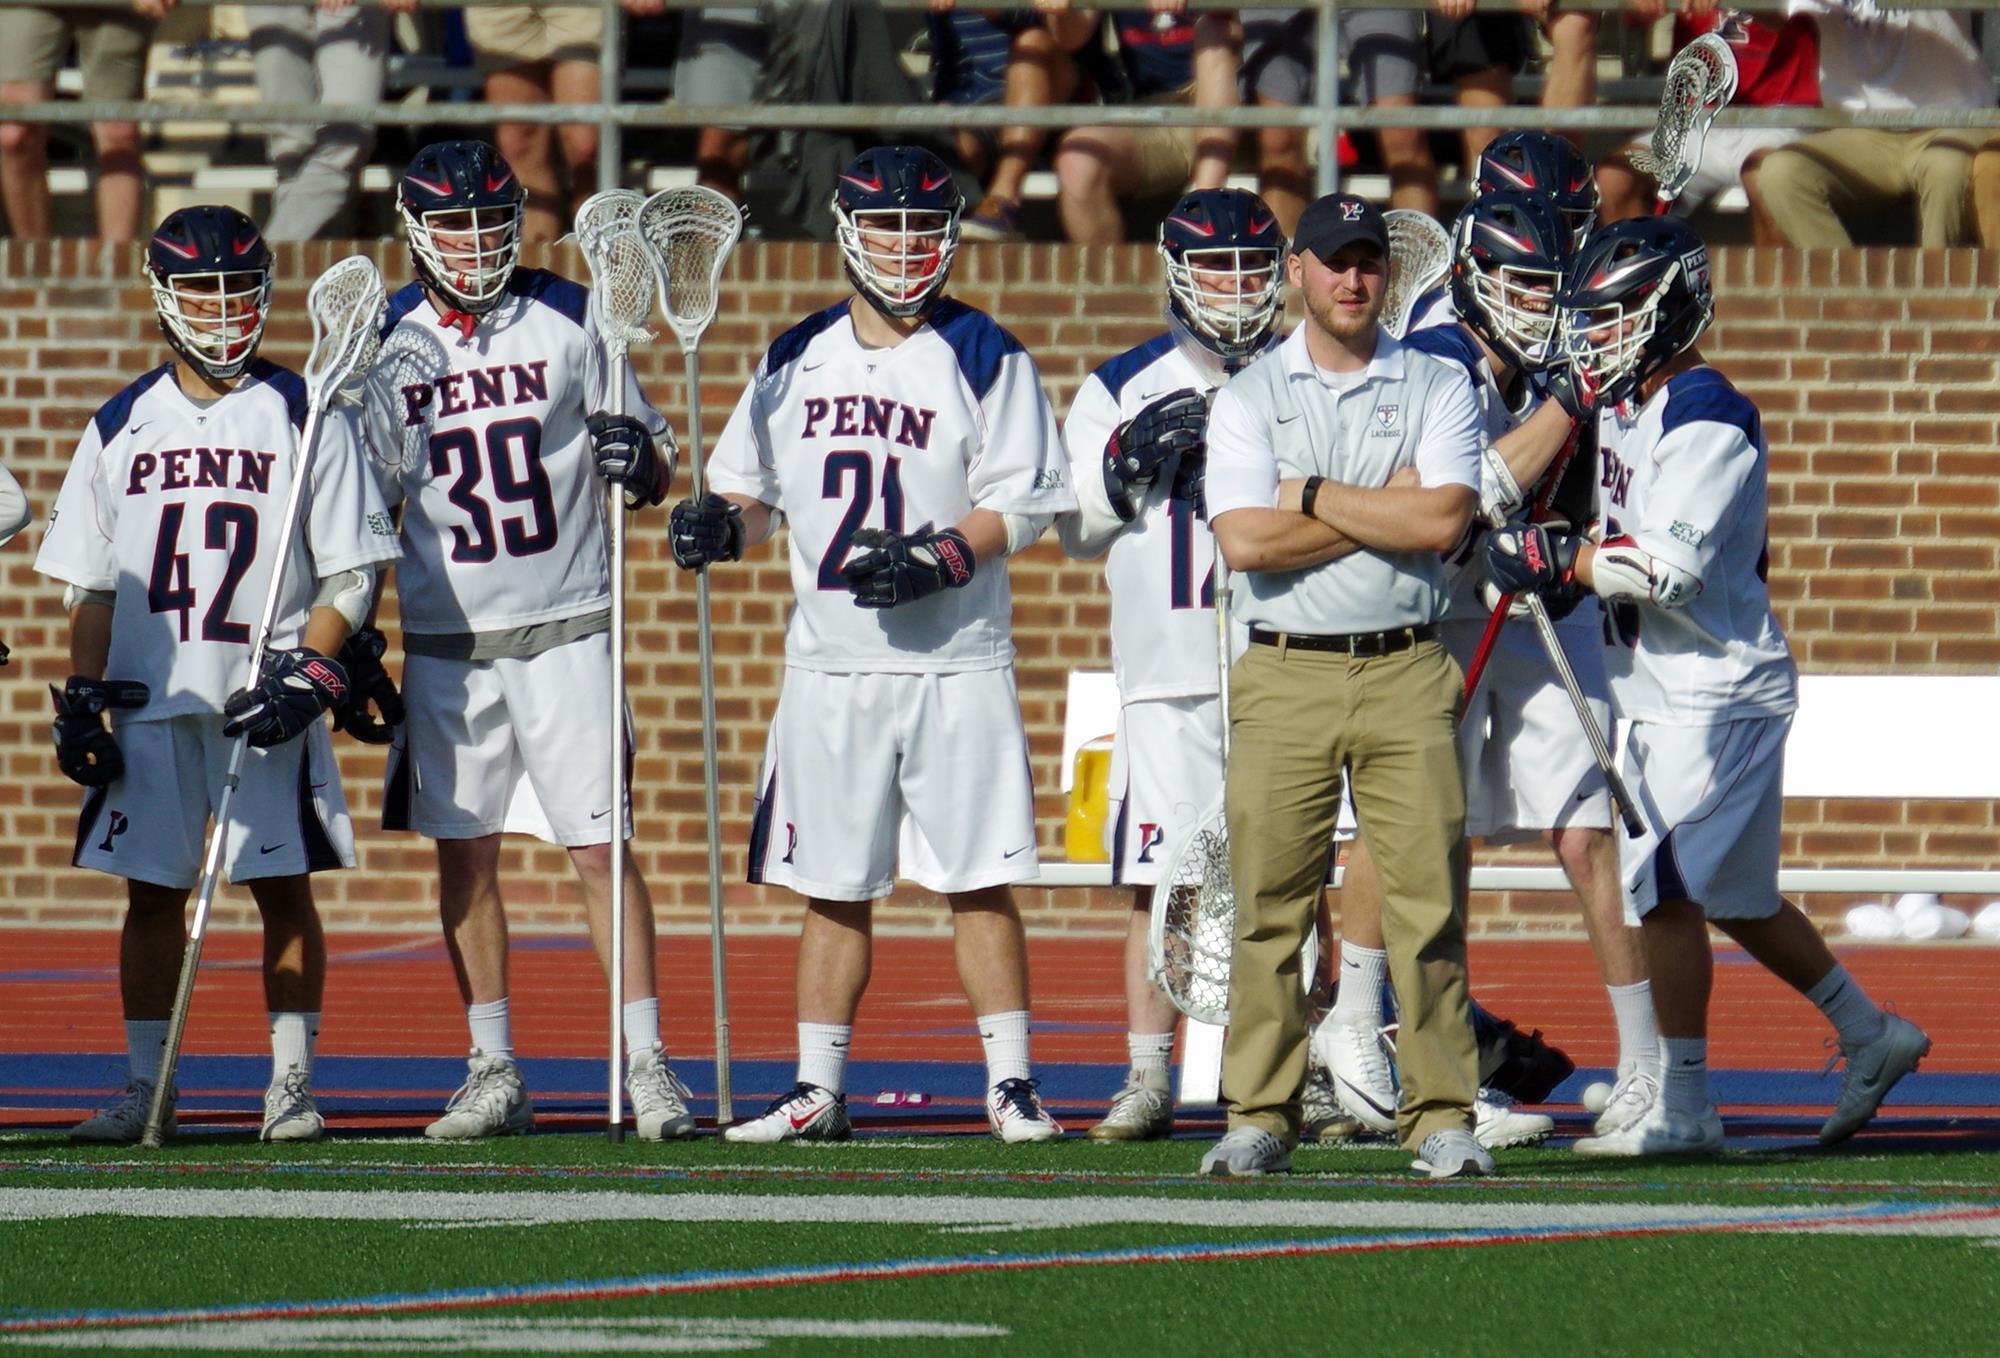 Anthony Erz, at right with arms crossed, observes play on the field with members of the lacrosse team.